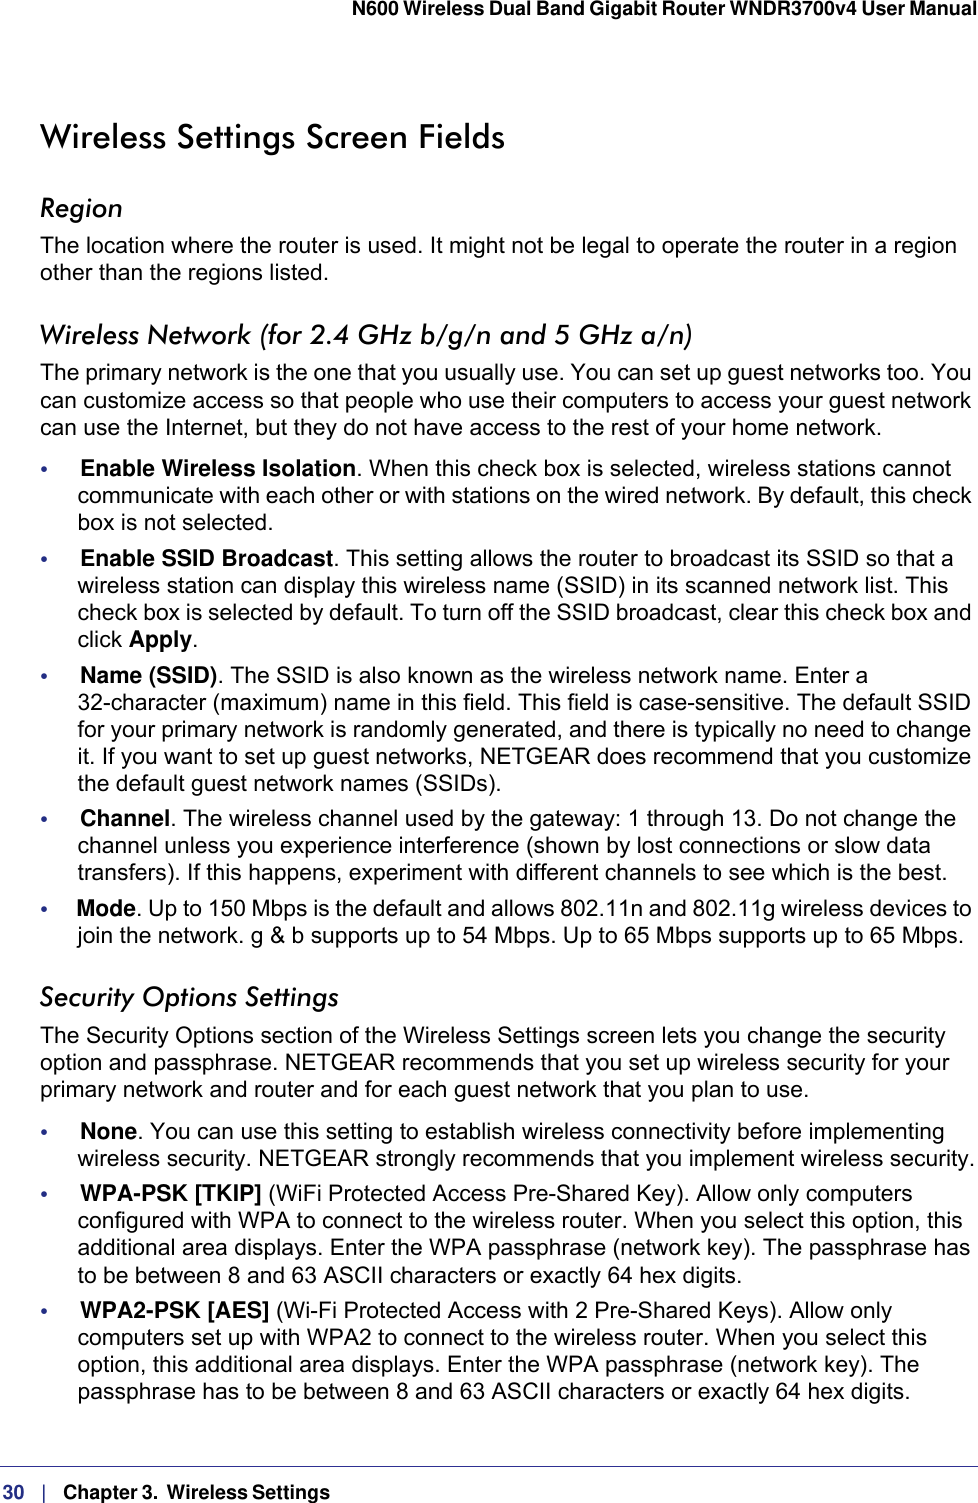 30   |   Chapter 3.  Wireless Settings  N600 Wireless Dual Band Gigabit Router WNDR3700v4 User Manual Wireless Settings Screen FieldsRegionThe location where the router is used. It might not be legal to operate the router in a region other than the regions listed.Wireless Network (for 2.4 GHz b/g/n and 5 GHz a/n)The primary network is the one that you usually use. You can set up guest networks too. You can customize access so that people who use their computers to access your guest network can use the Internet, but they do not have access to the rest of your home network. •     Enable Wireless Isolation. When this check box is selected, wireless stations cannot communicate with each other or with stations on the wired network. By default, this check box is not selected.•     Enable SSID Broadcast. This setting allows the router to broadcast its SSID so that a wireless station can display this wireless name (SSID) in its scanned network list. This check box is selected by default. To turn off the SSID broadcast, clear this check box and click Apply.•     Name (SSID). The SSID is also known as the wireless network name. Enter a 32-character (maximum) name in this field. This field is case-sensitive. The default SSID for your primary network is randomly generated, and there is typically no need to change it. If you want to set up guest networks, NETGEAR does recommend that you customize the default guest network names (SSIDs).•     Channel. The wireless channel used by the gateway: 1 through 13. Do not change the channel unless you experience interference (shown by lost connections or slow data transfers). If this happens, experiment with different channels to see which is the best.•     Mode. Up to 150 Mbps is the default and allows 802.11n and 802.11g wireless devices to join the network. g &amp; b supports up to 54 Mbps. Up to 65 Mbps supports up to 65 Mbps.Security Options SettingsThe Security Options section of the Wireless Settings screen lets you change the security option and passphrase. NETGEAR recommends that you set up wireless security for your primary network and router and for each guest network that you plan to use. •     None. You can use this setting to establish wireless connectivity before implementing wireless security. NETGEAR strongly recommends that you implement wireless security.•     WPA-PSK [TKIP] (WiFi Protected Access Pre-Shared Key). Allow only computers configured with WPA to connect to the wireless router. When you select this option, this additional area displays. Enter the WPA passphrase (network key). The passphrase has to be between 8 and 63 ASCII characters or exactly 64 hex digits.•     WPA2-PSK [AES] (Wi-Fi Protected Access with 2 Pre-Shared Keys). Allow only computers set up with WPA2 to connect to the wireless router. When you select this option, this additional area displays. Enter the WPA passphrase (network key). The passphrase has to be between 8 and 63 ASCII characters or exactly 64 hex digits.